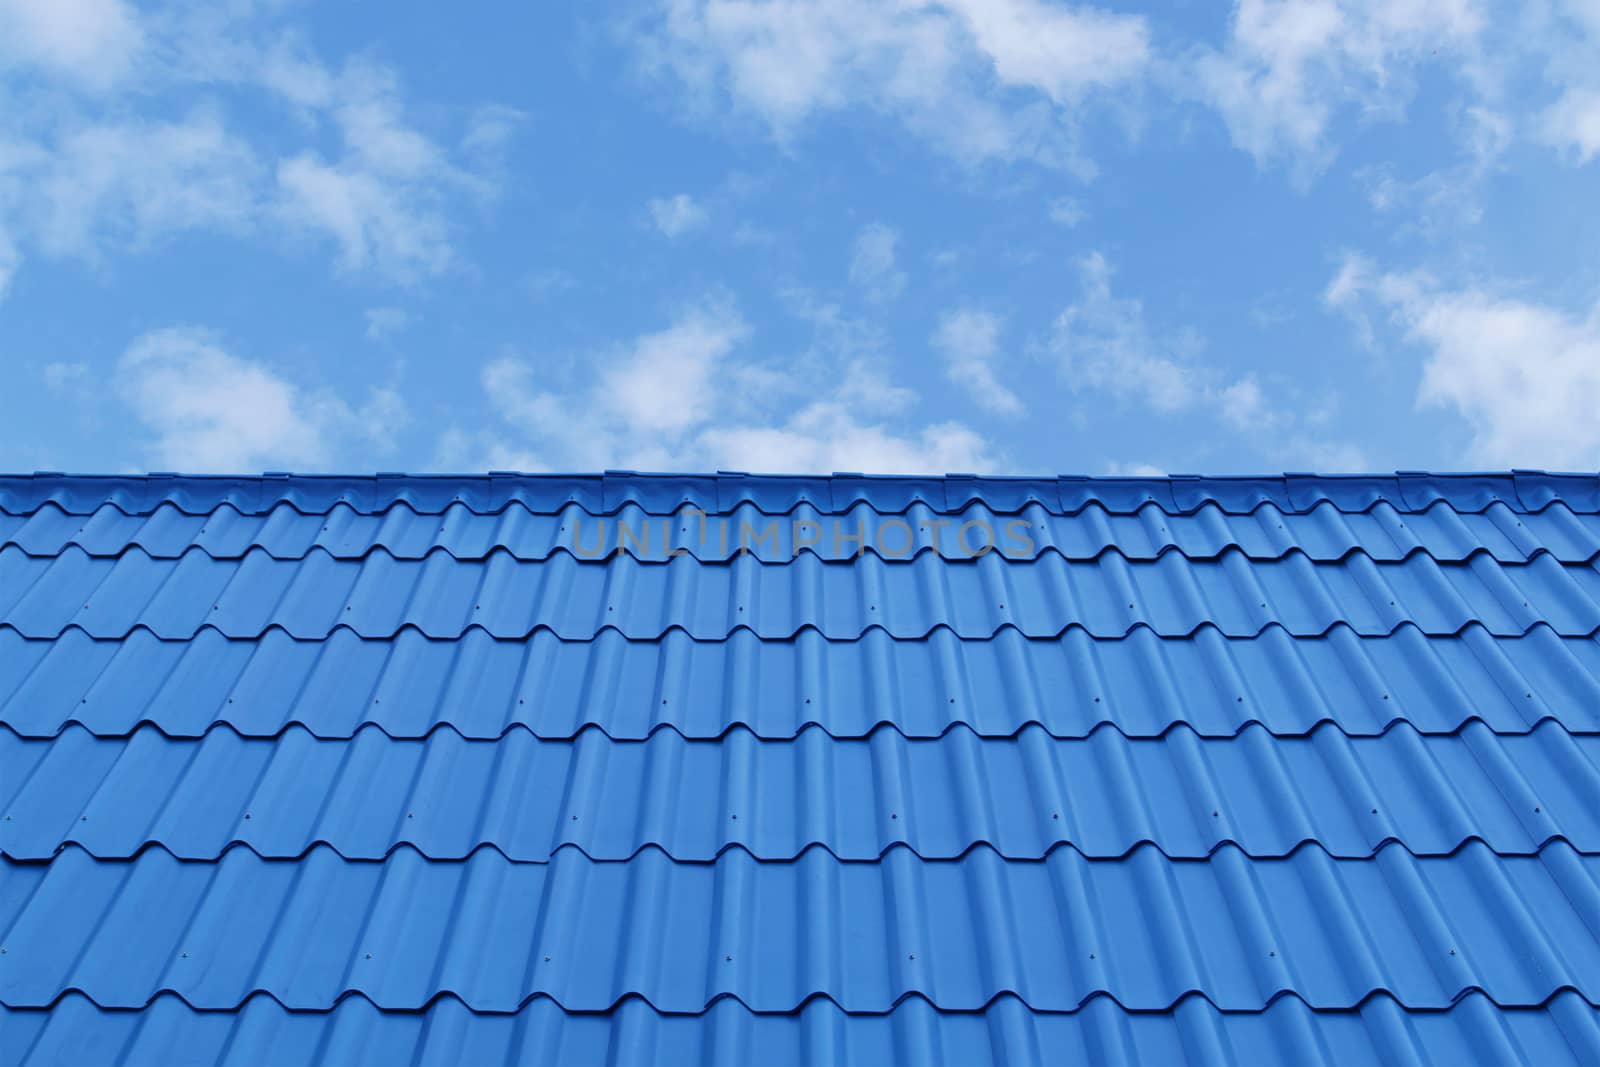 Blue Roof on Blue Sky Background by foto76